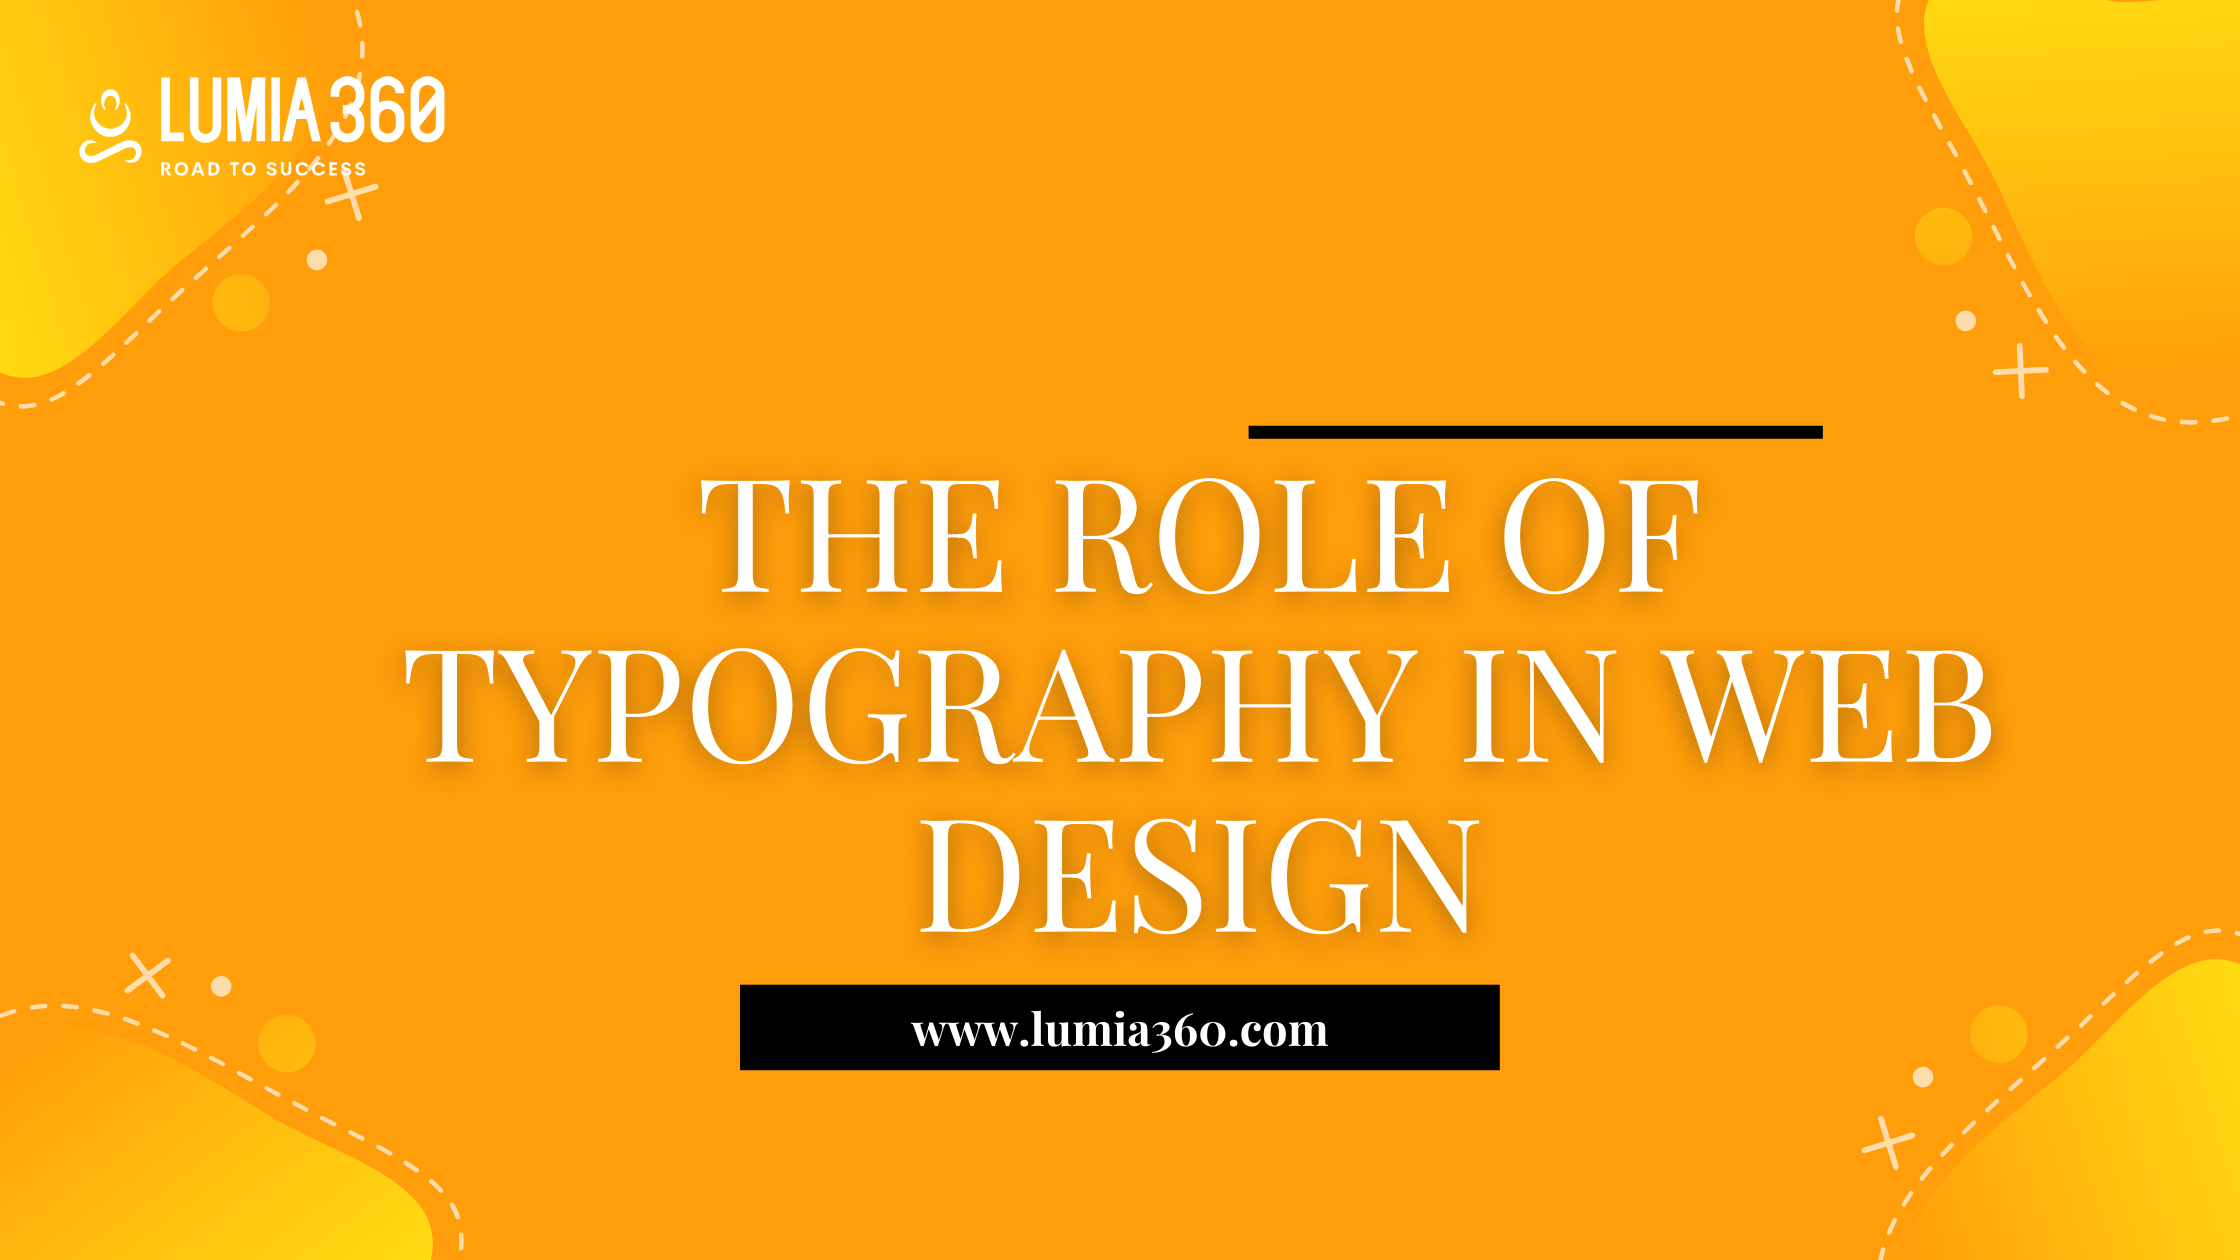 Explore the role of typography in web design